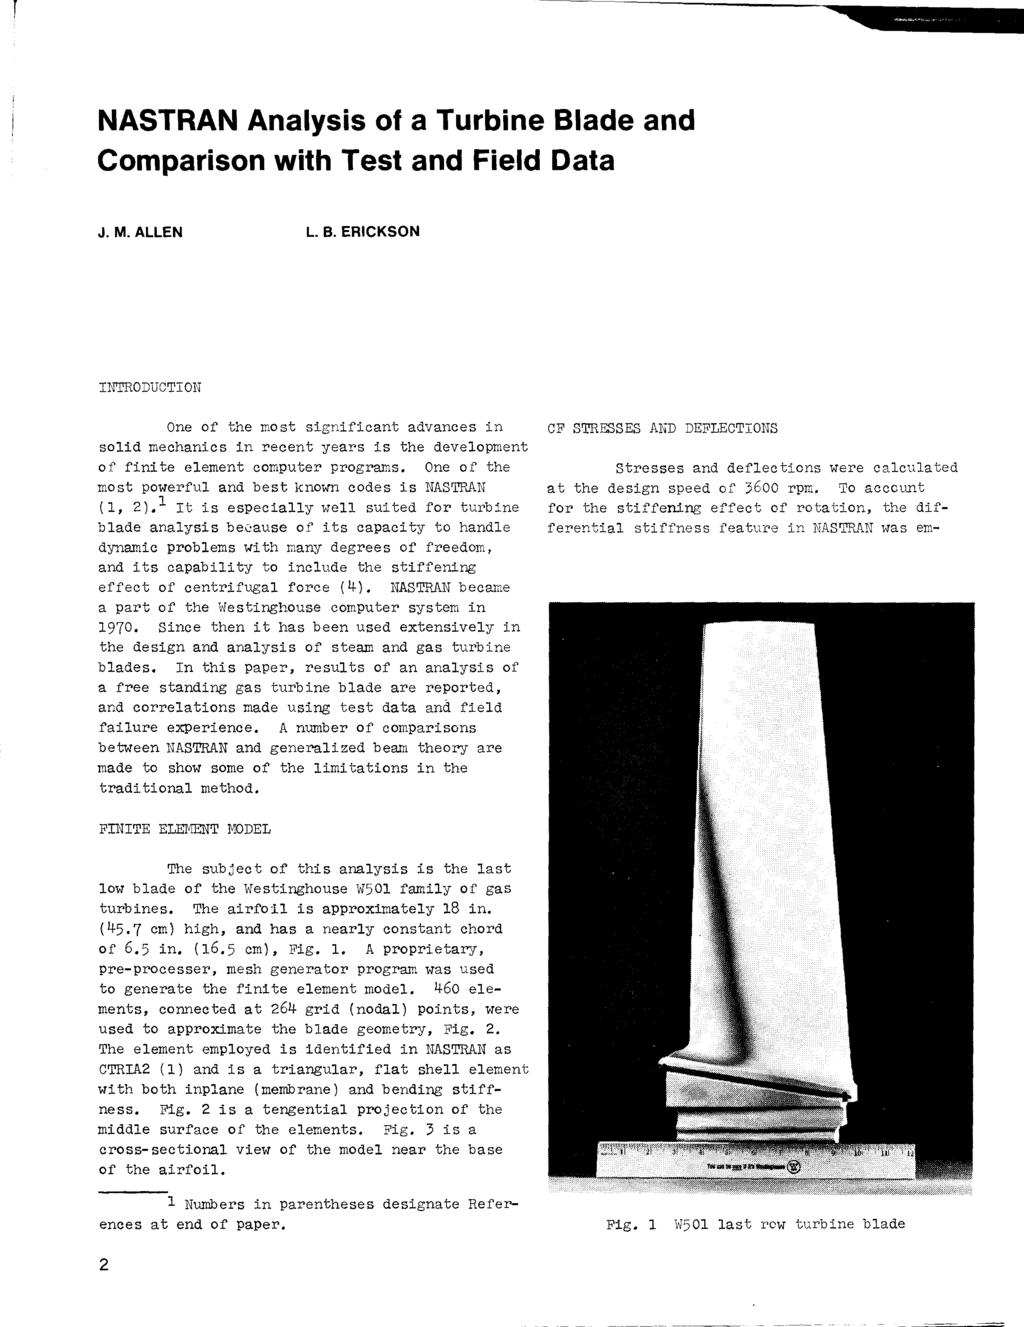 NASTRAN Analysis of a Turbine Blade and Comparison with Test and Field Data J. M. ALLEN L. B. ERICKSON INTRODUCTION One of the most significant advances in solid mechanics in recent years is the development of finite element computer programs.